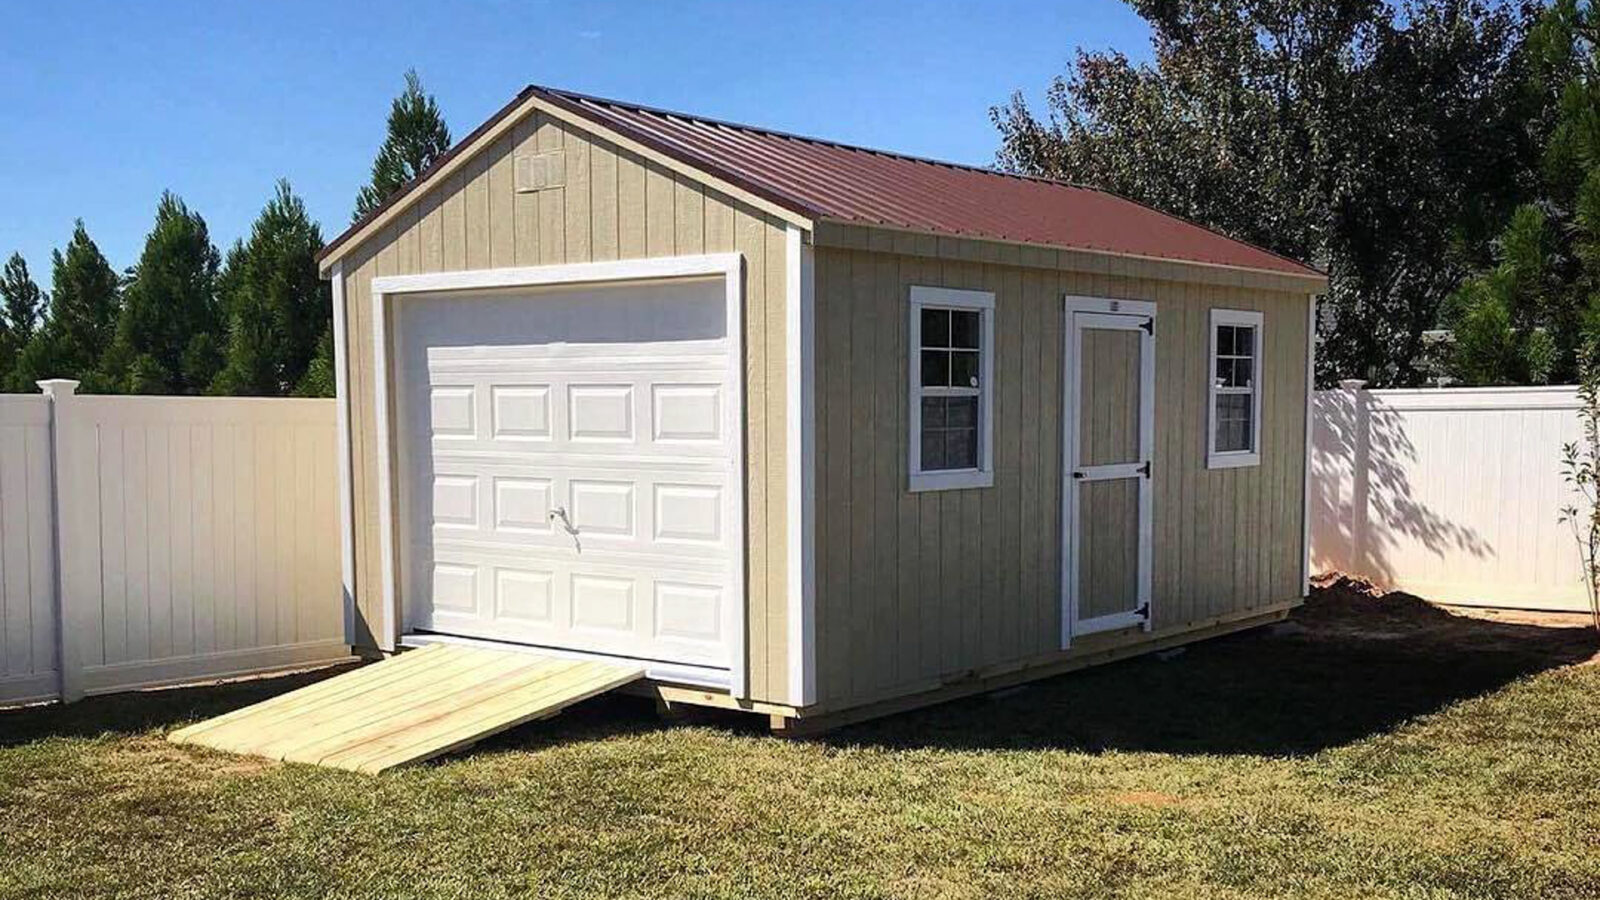 A garage up to building code in SC